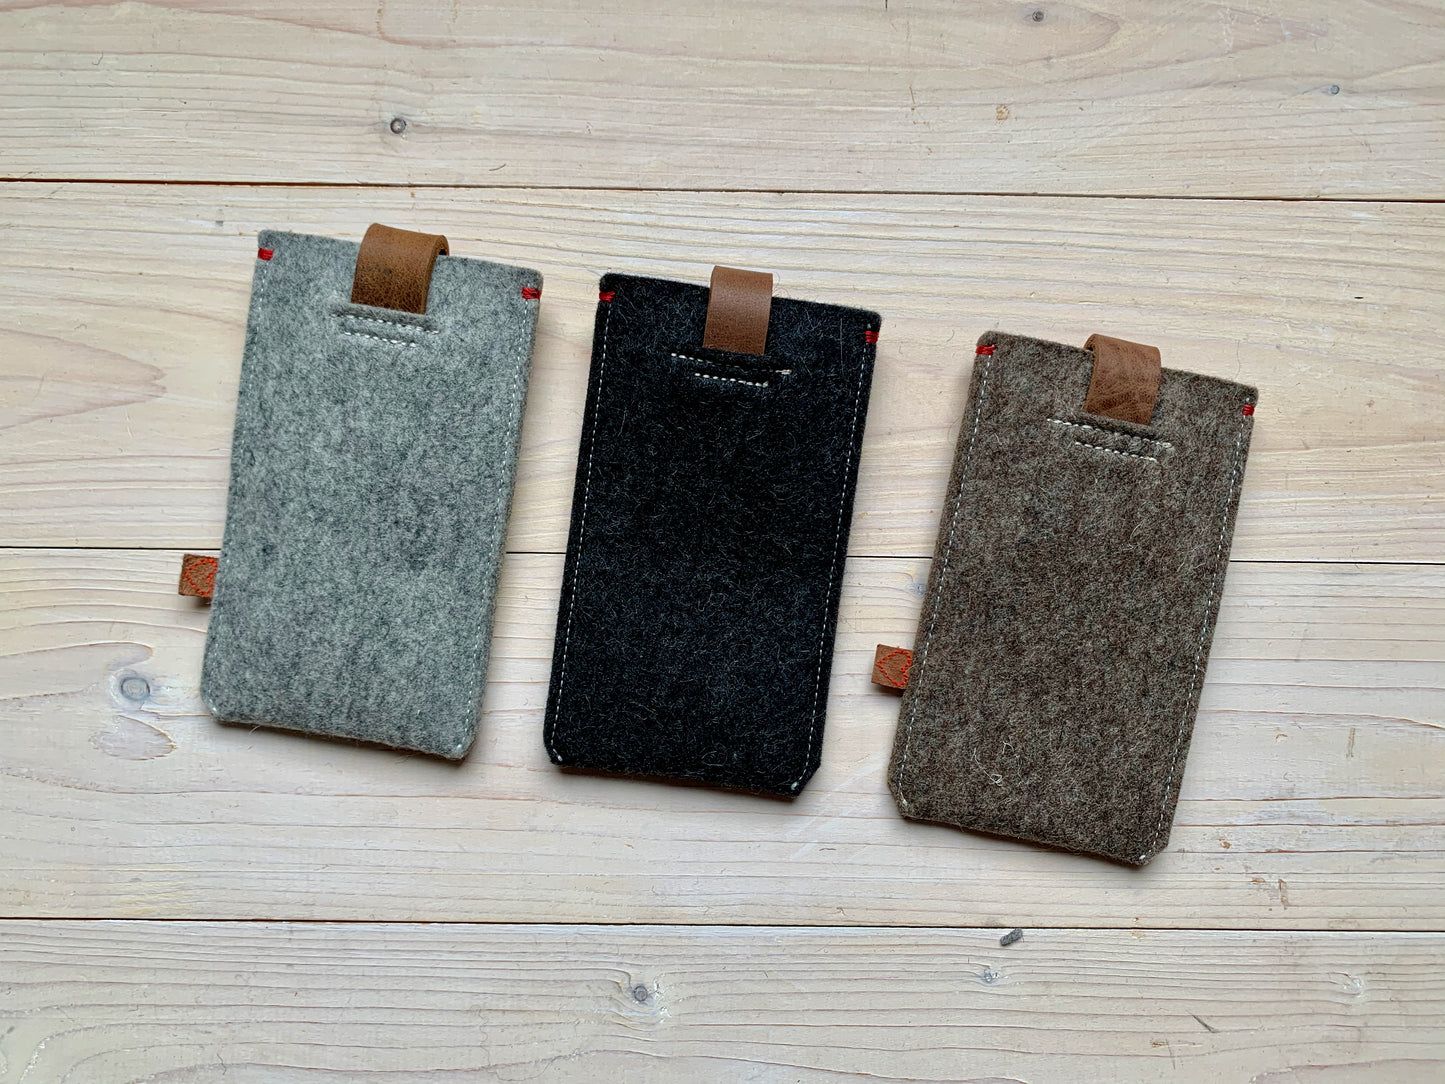 IPhone 8 and iPhone SE 2020 Felt covers with leather closure sale